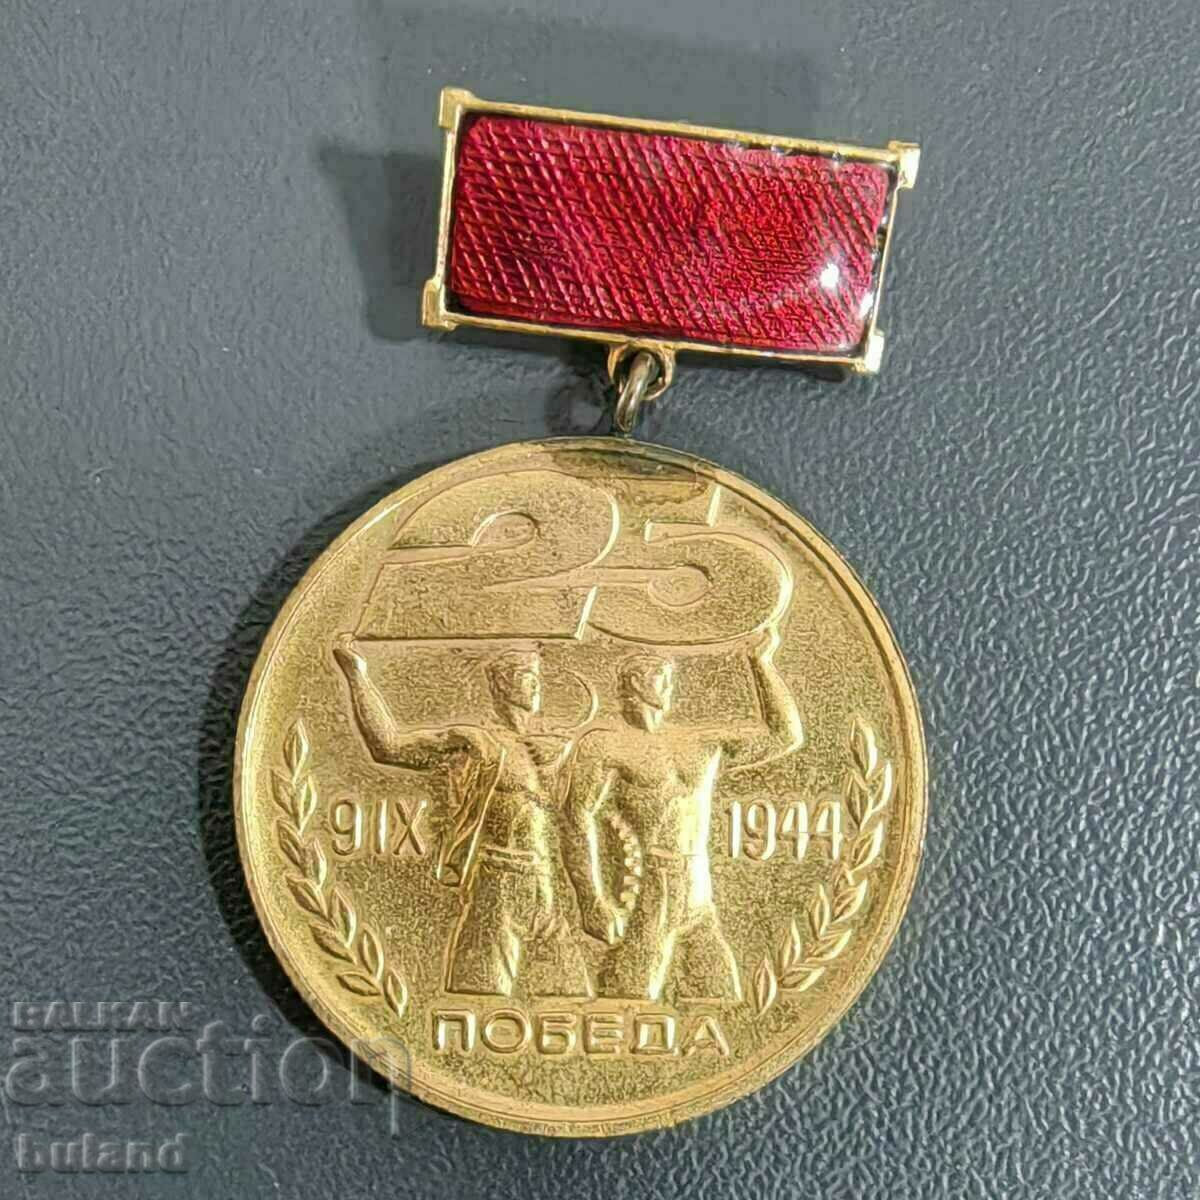 Bulgaria Social Medal Conquered Victory Passport 1944 NRB